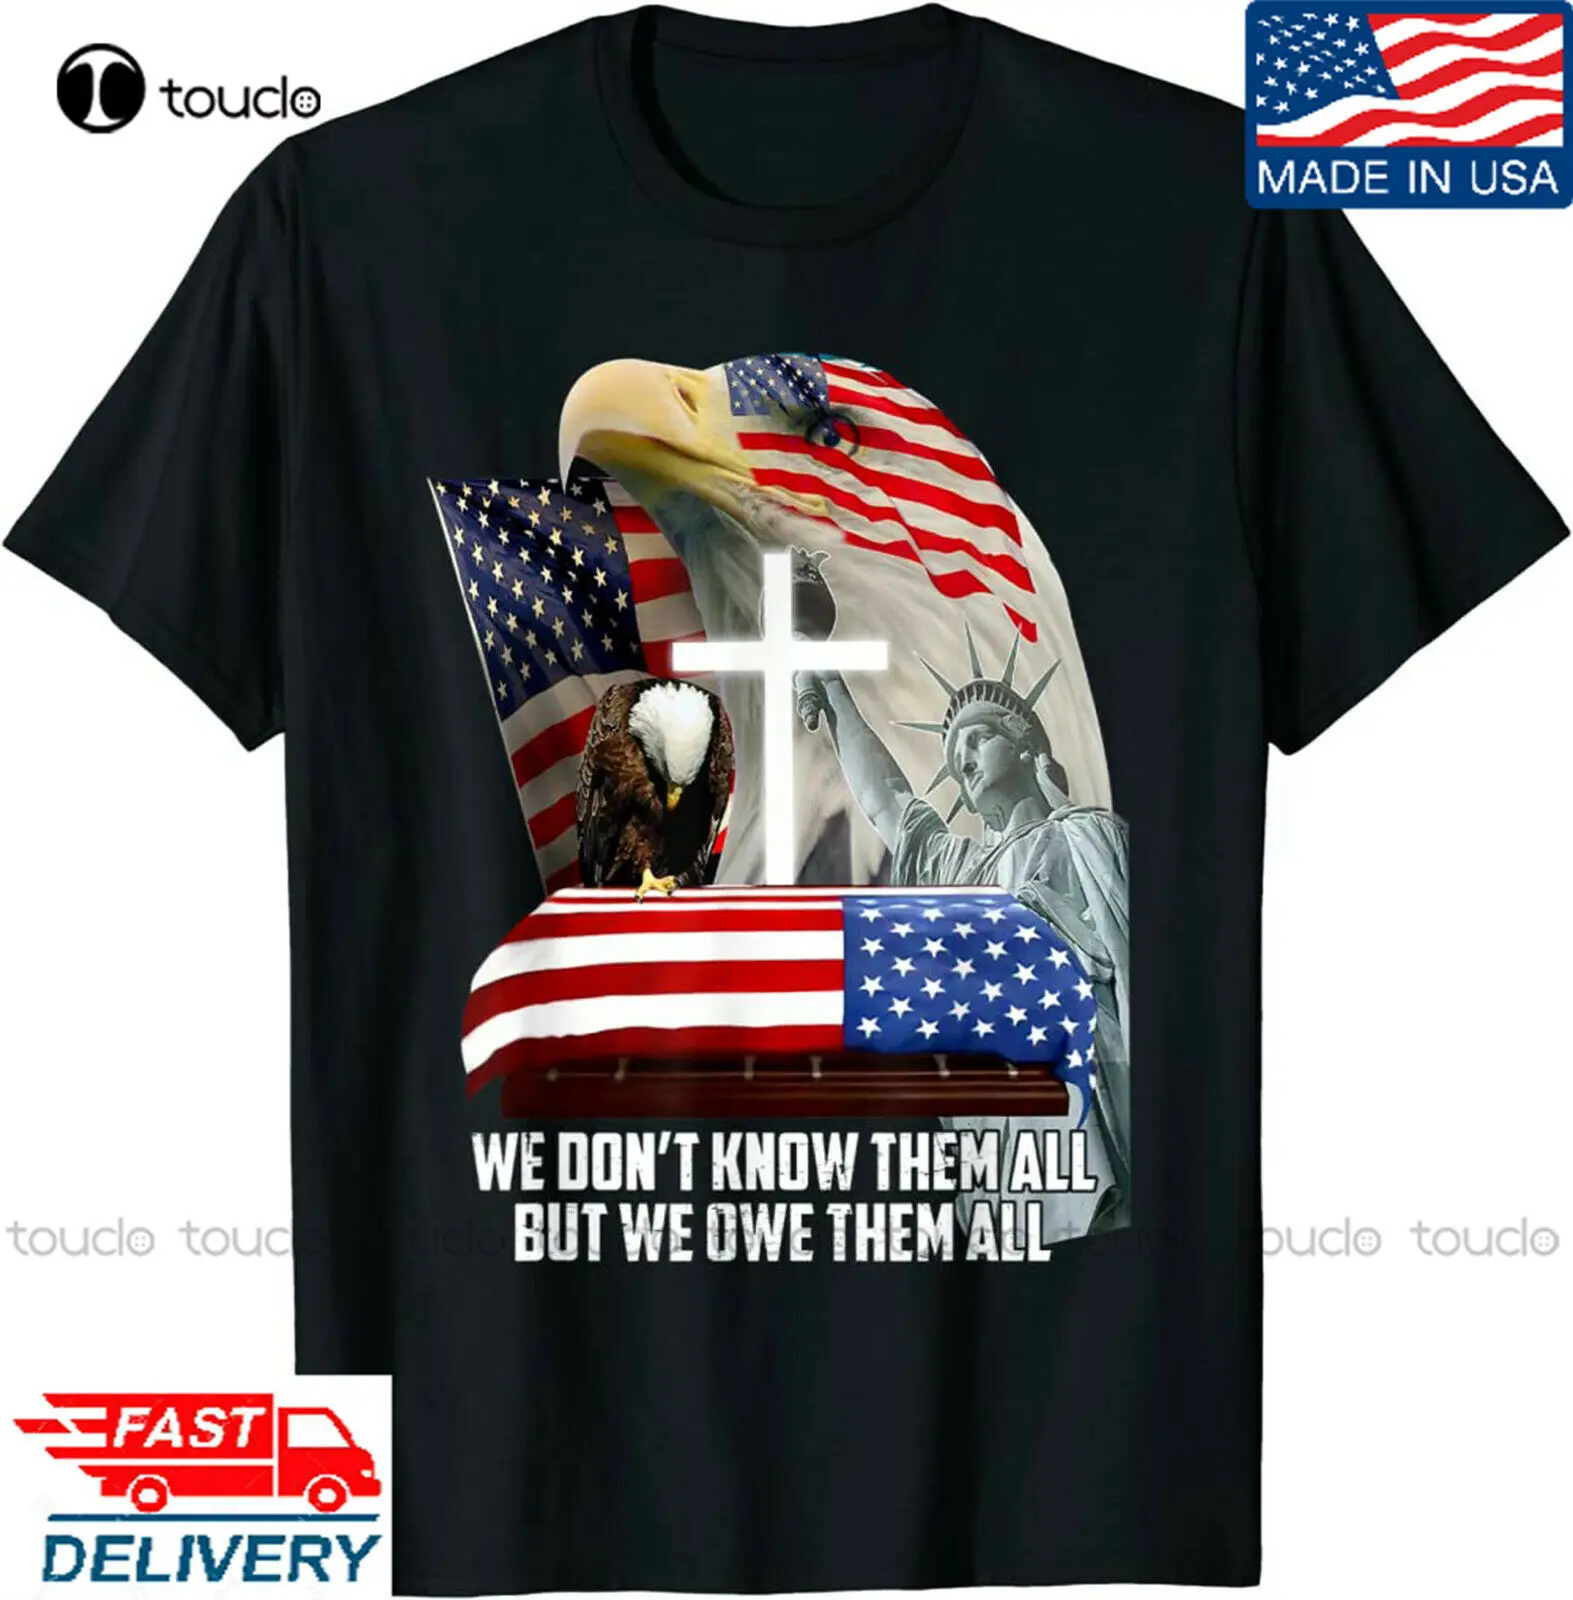 

We Don'T Know Them All But We Owe Them All Eagles Usa Flag T-Shirt, Veteran Tee Shirts For Men Short Sleeve Christmas Gift Retro